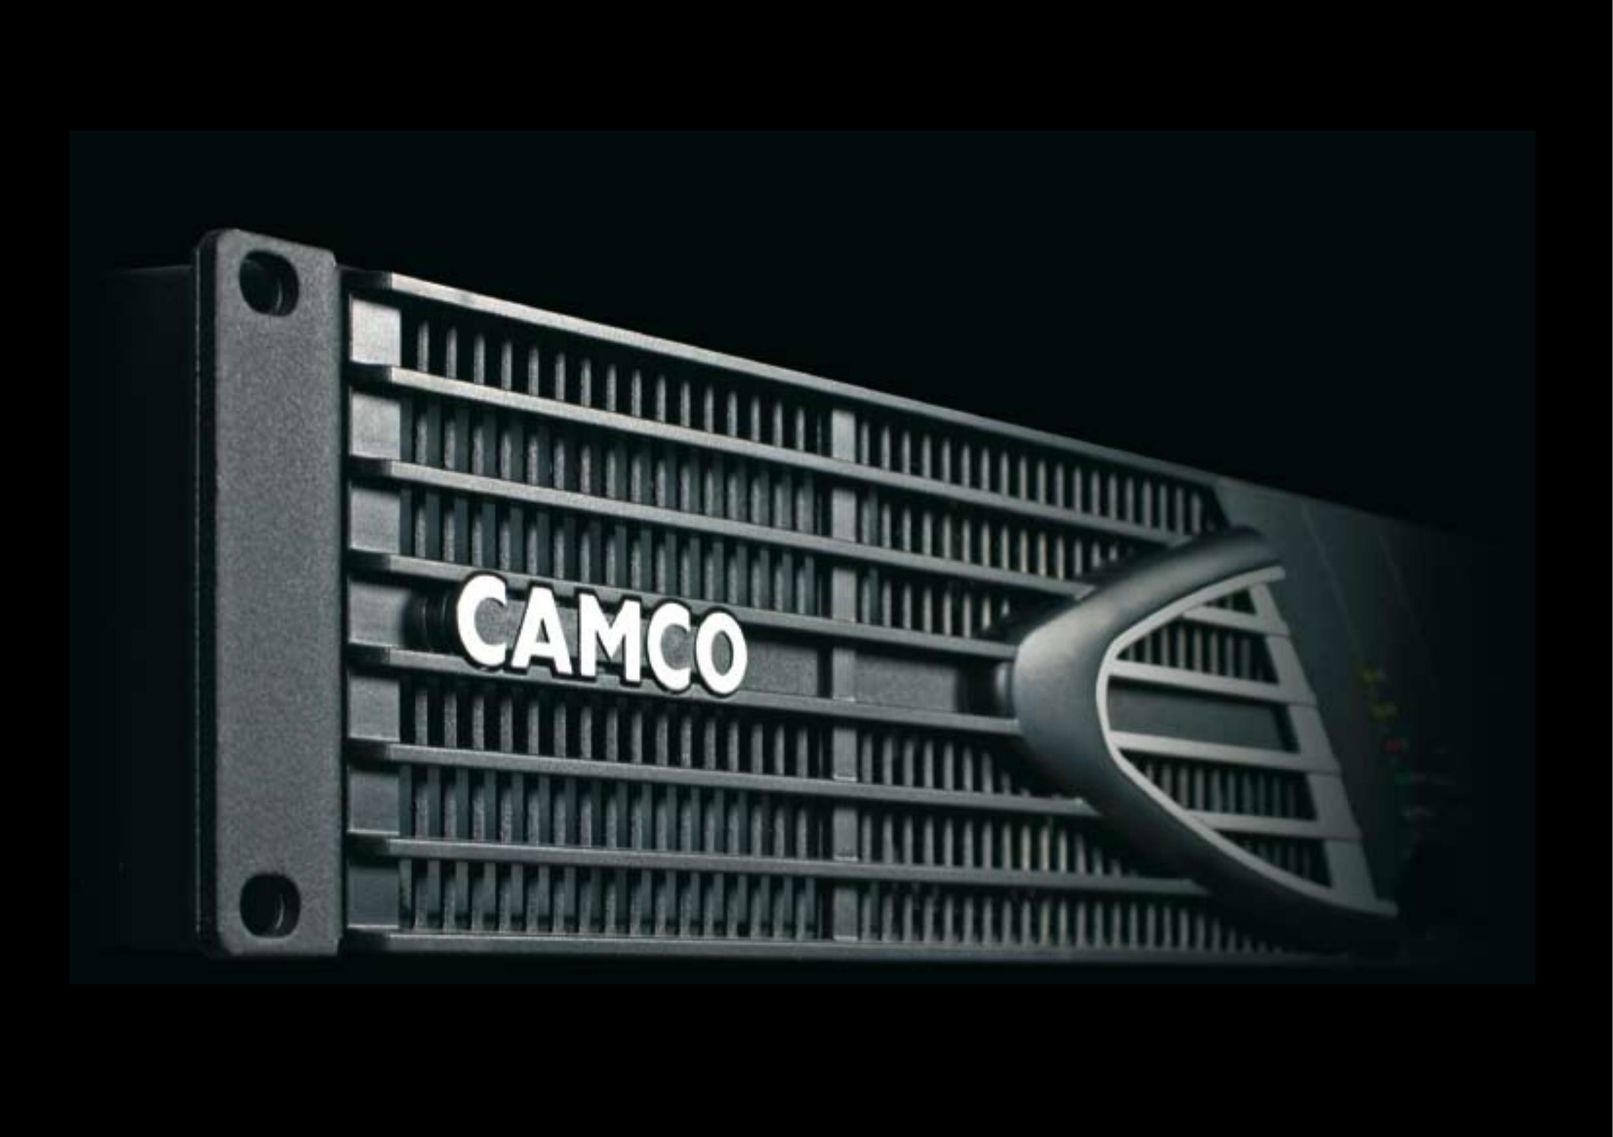 Camco P.7 Series Stereo Amplifier User Manual